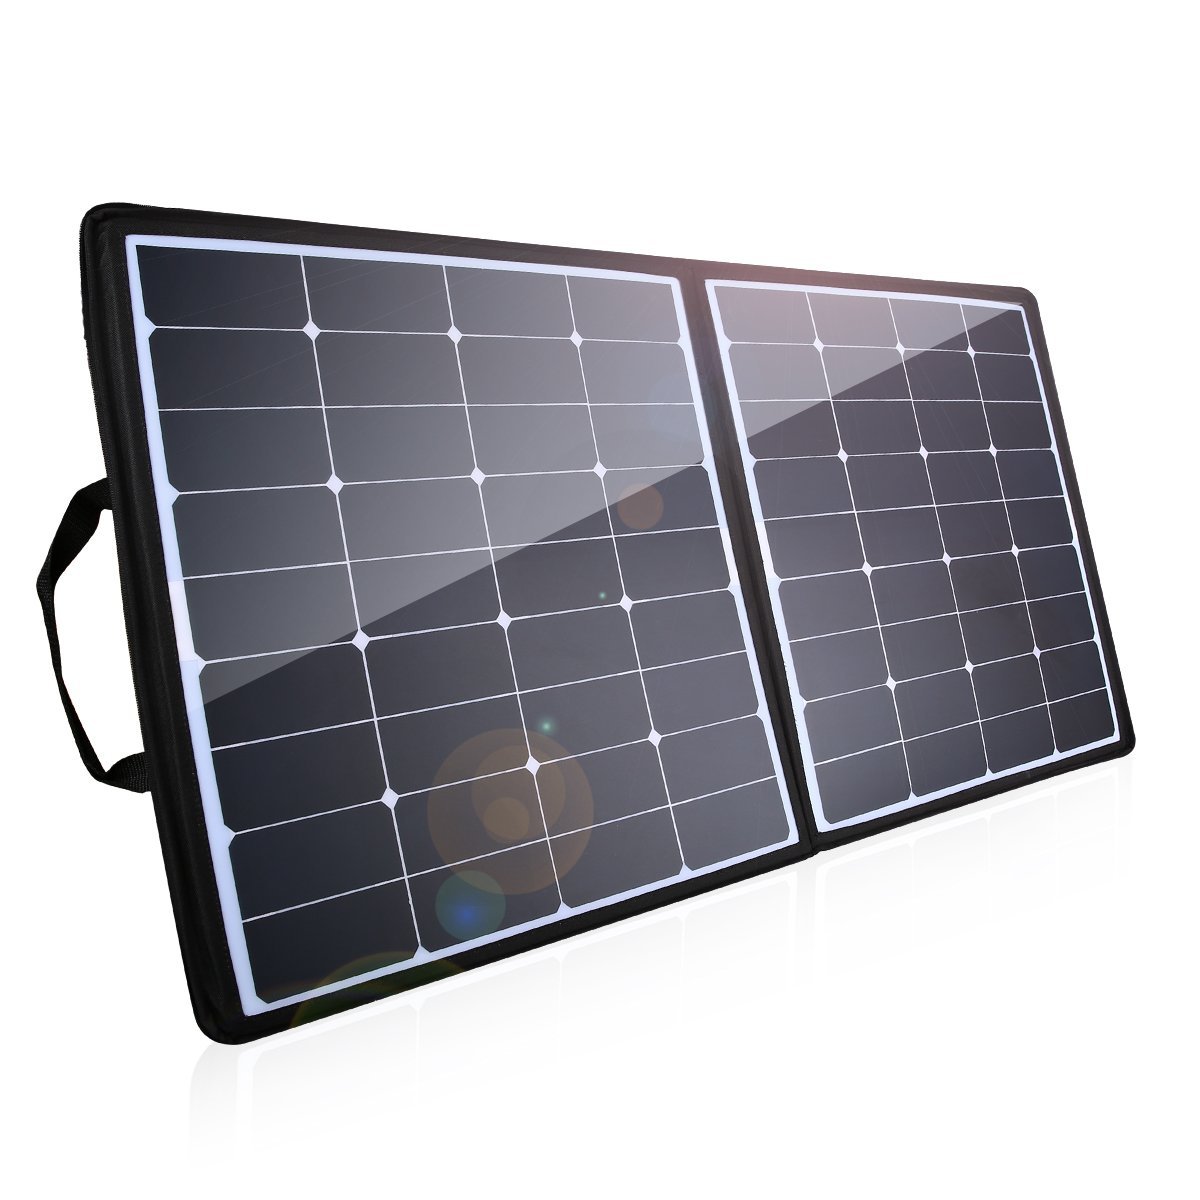 [High Effiency] 100W Solar Charger, Poweradd 18V 12V Foldable Solar Panel Water / Shock / Dust Resistant Sunpower Panel for Laptop, iPhone, Samsung, Generator, PowerHouse, ChargerCenter, UPS and More